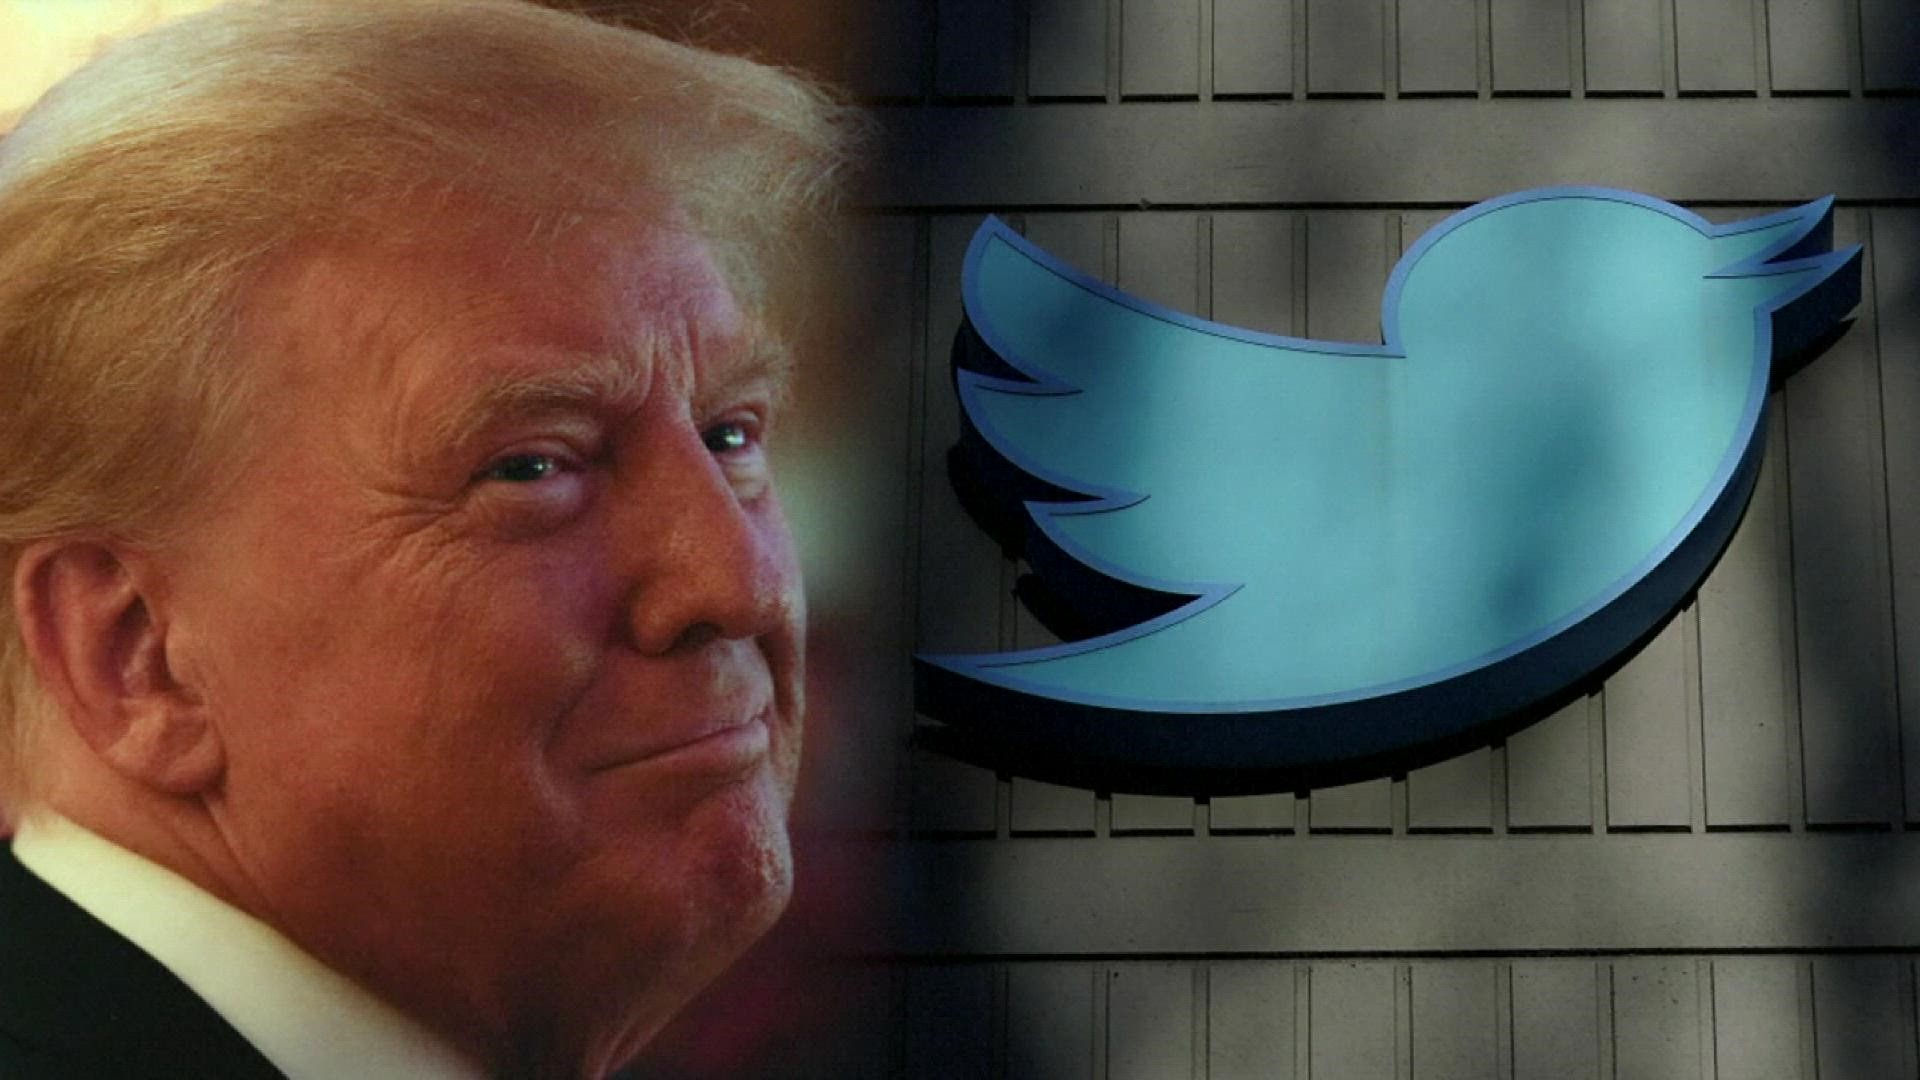 After a poll was conducted to reinstate the former president’s account, Trump said he had no interest in returning to the social platform.